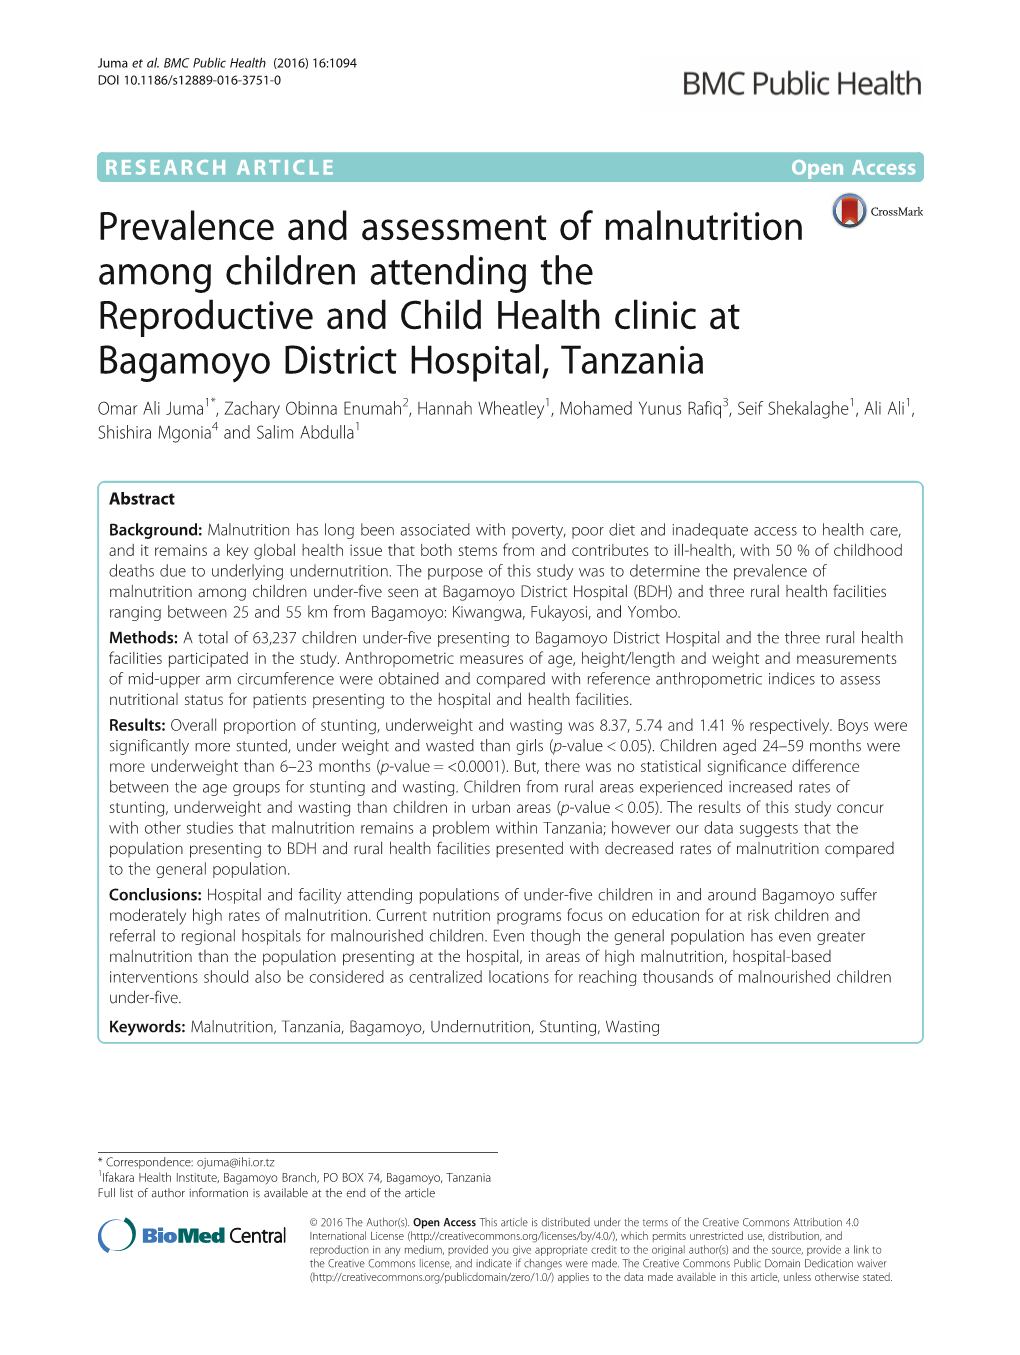 Prevalence and Assessment of Malnutrition Among Children Attending the Reproductive and Child Health Clinic at Bagamoyo District